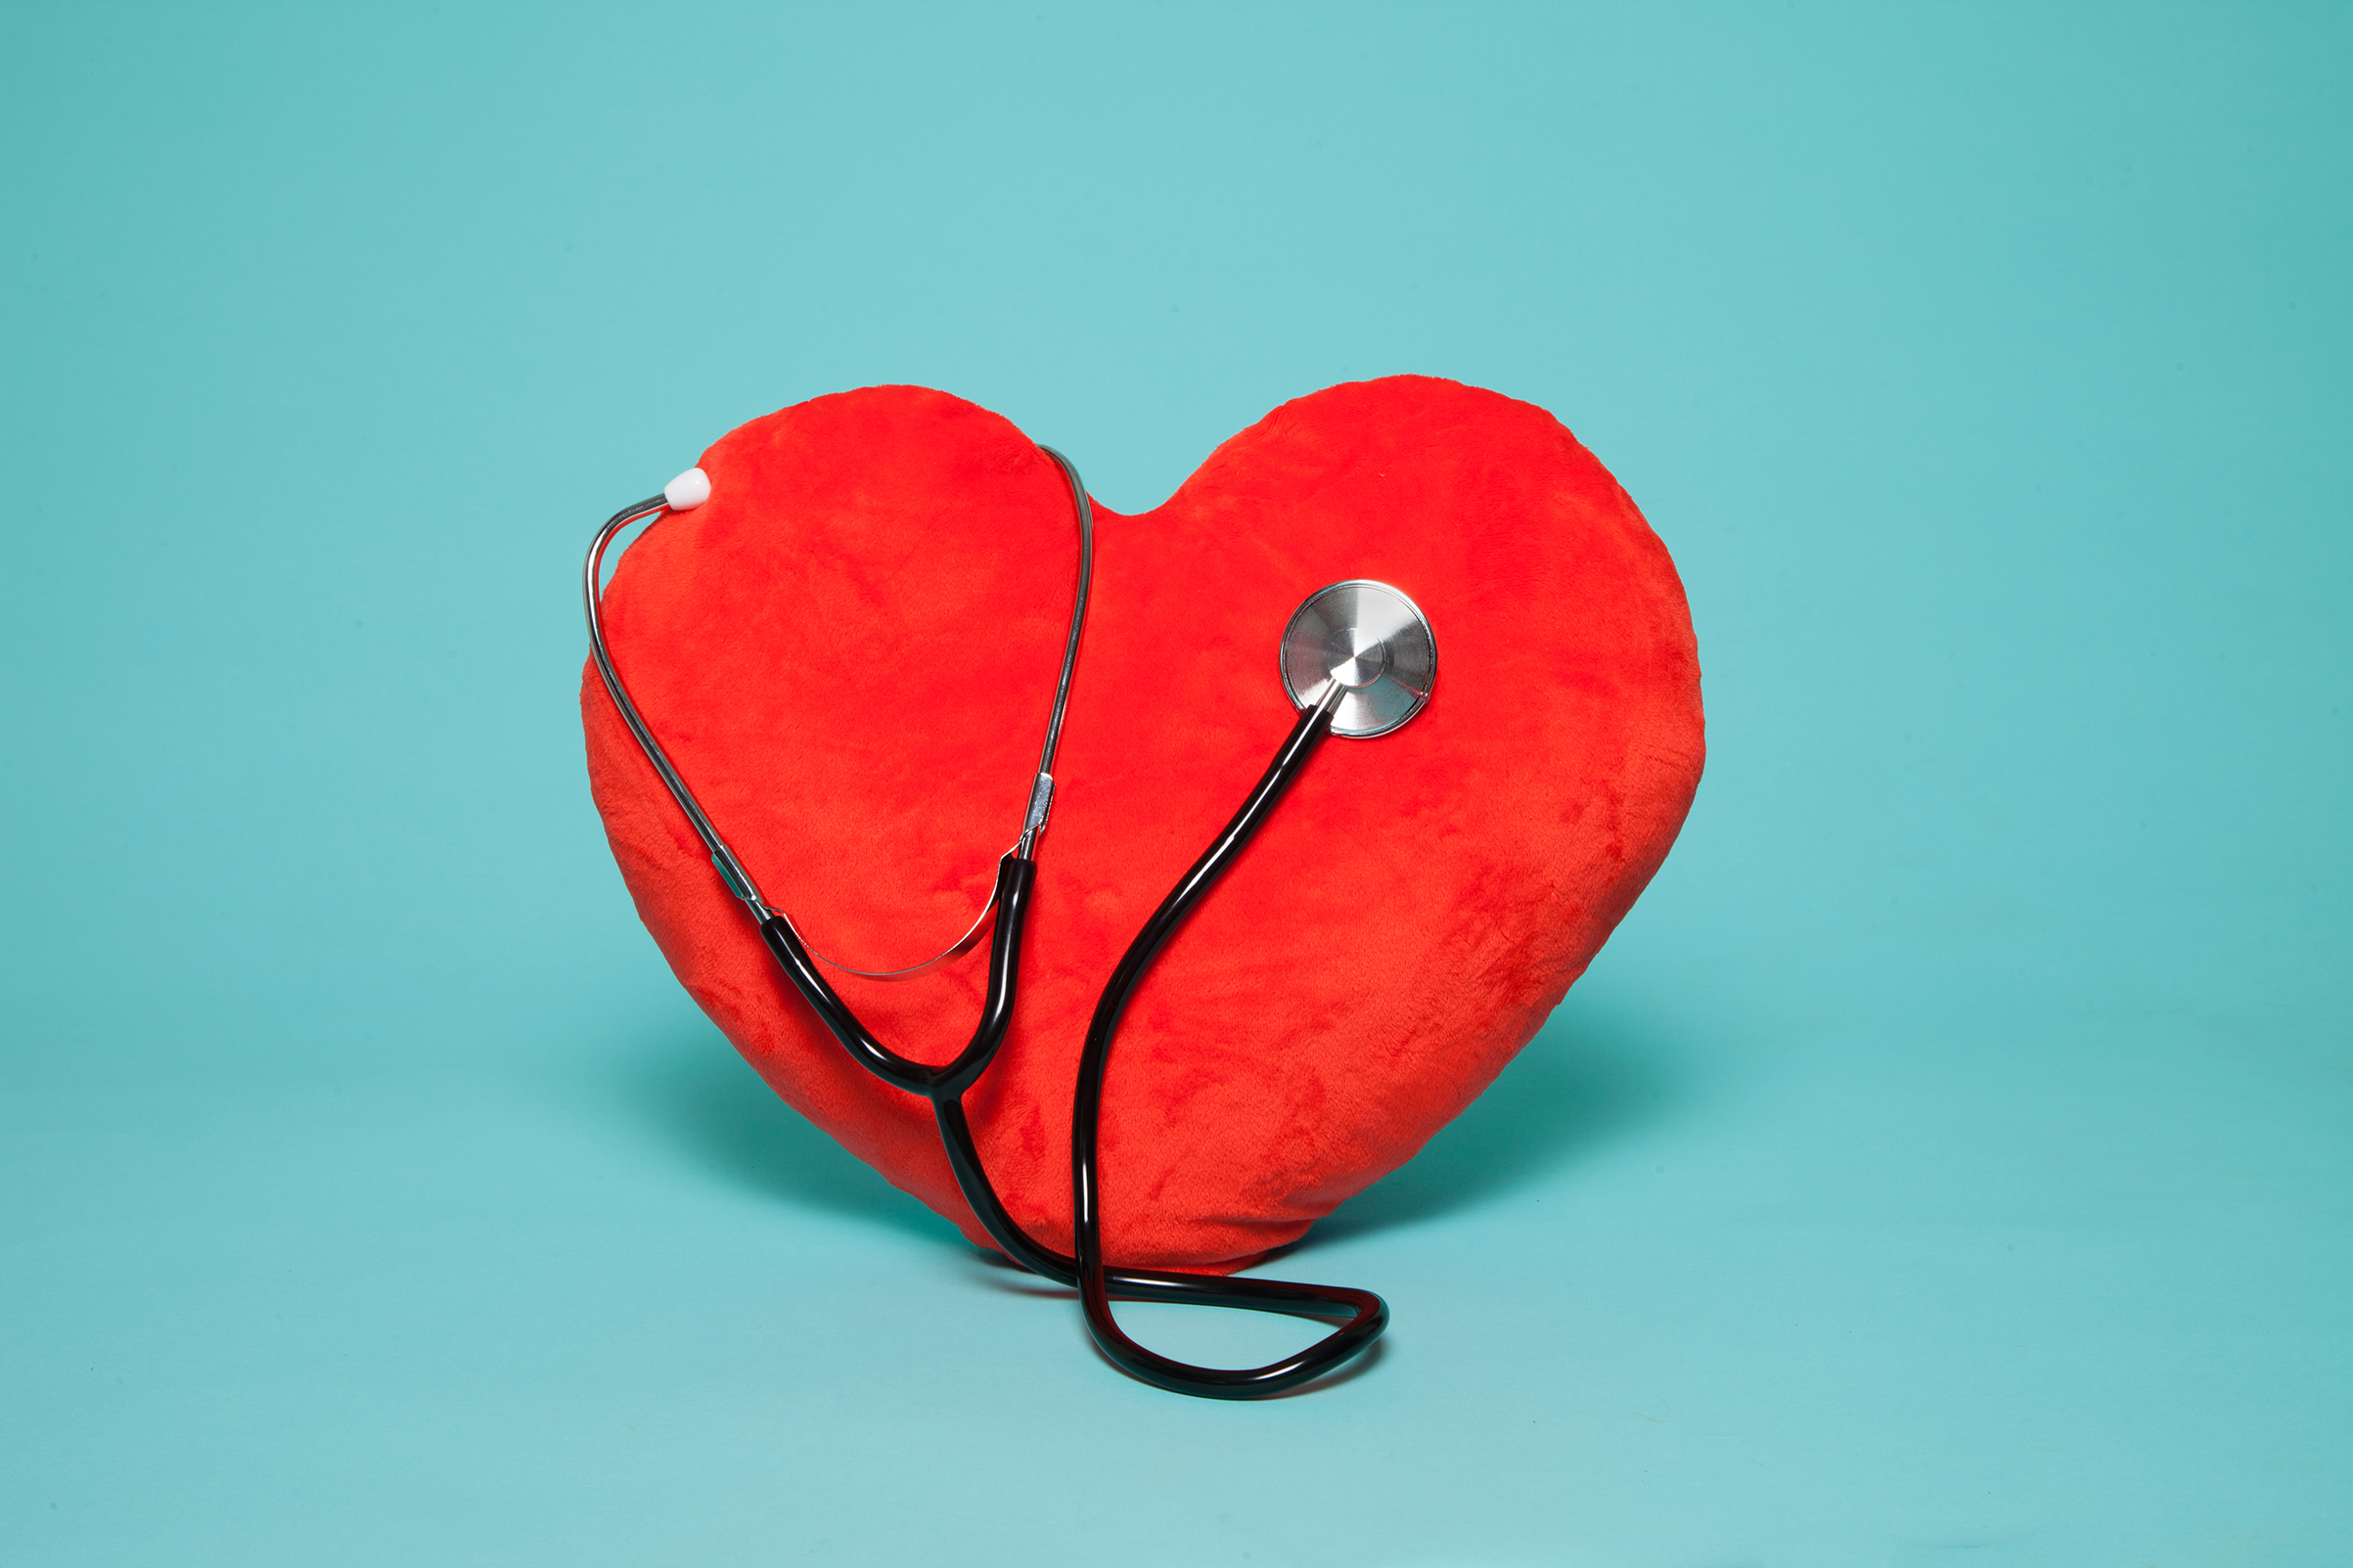 8 Science-Backed Ways to Prevent Heart Attacks, According to New Guidelines  | Time